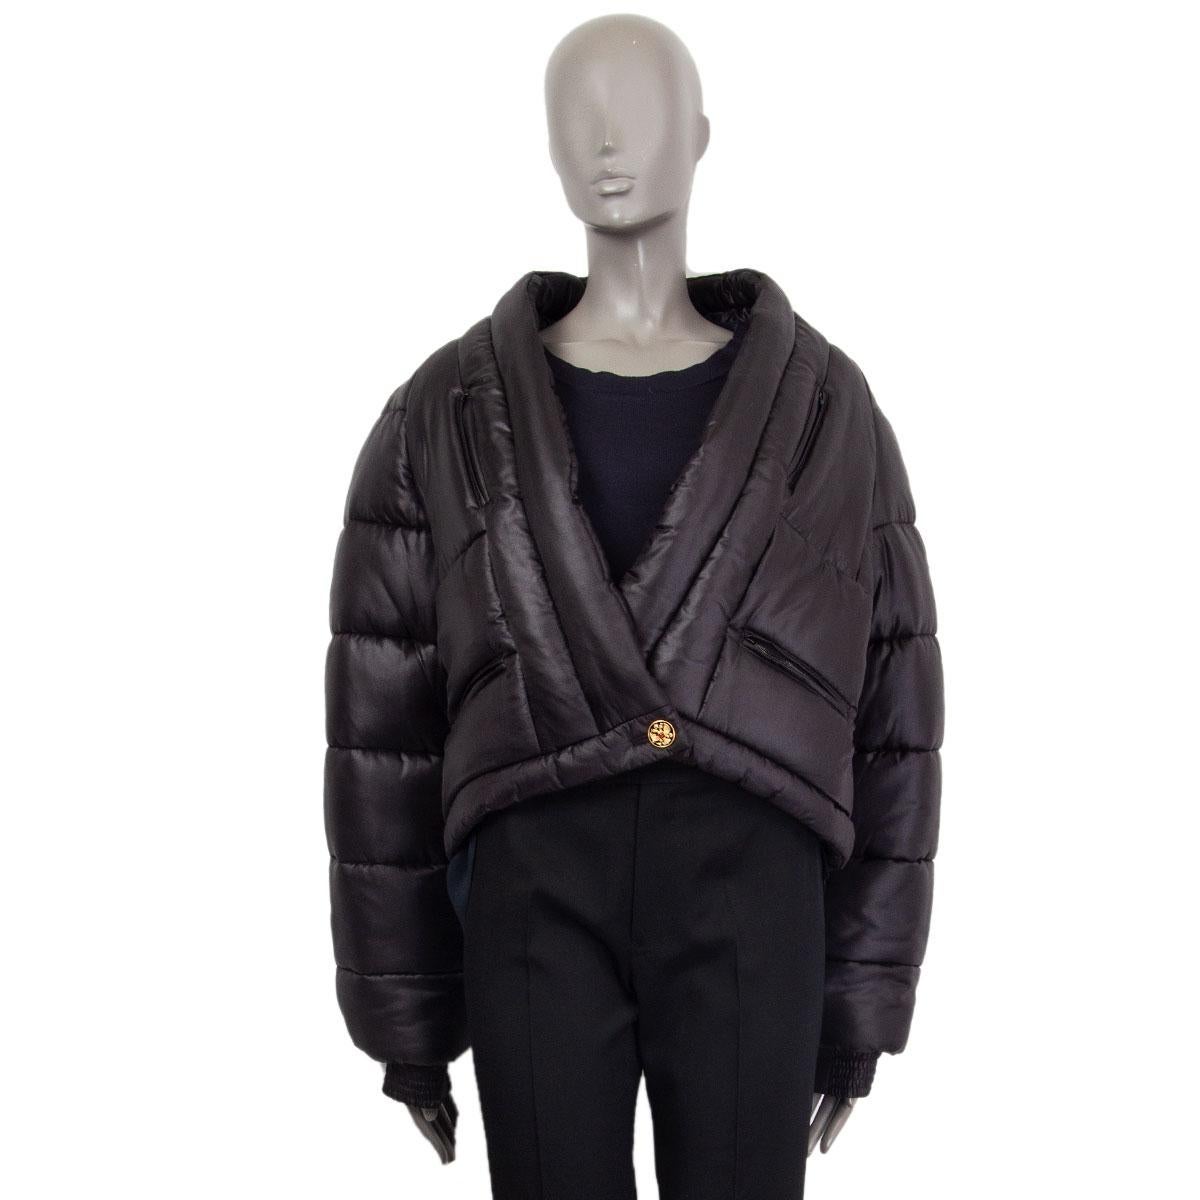  Chanel 'Paris-Moscow' double-breasted puffer jacket in black silk (100%). With v-neck, ribbed cuffs, CC crest patch on one arm, and four zipper pockets on the front. Closes with one black and golden CC crest button and one concealed butoon on the